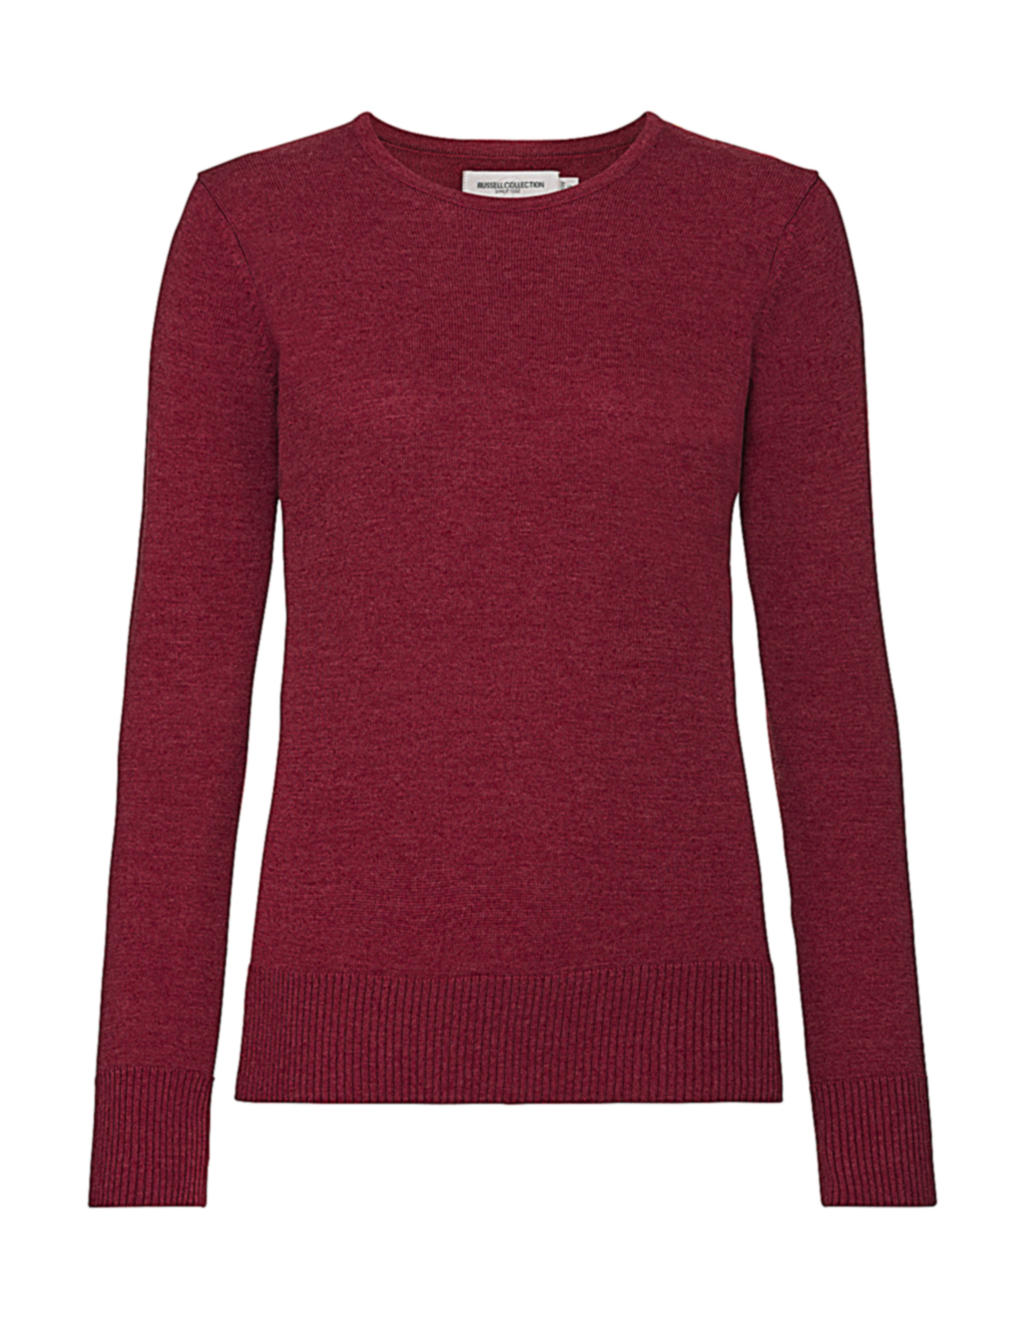  Ladies Crew Neck Knitted Pullover in Farbe Cranberry Marl